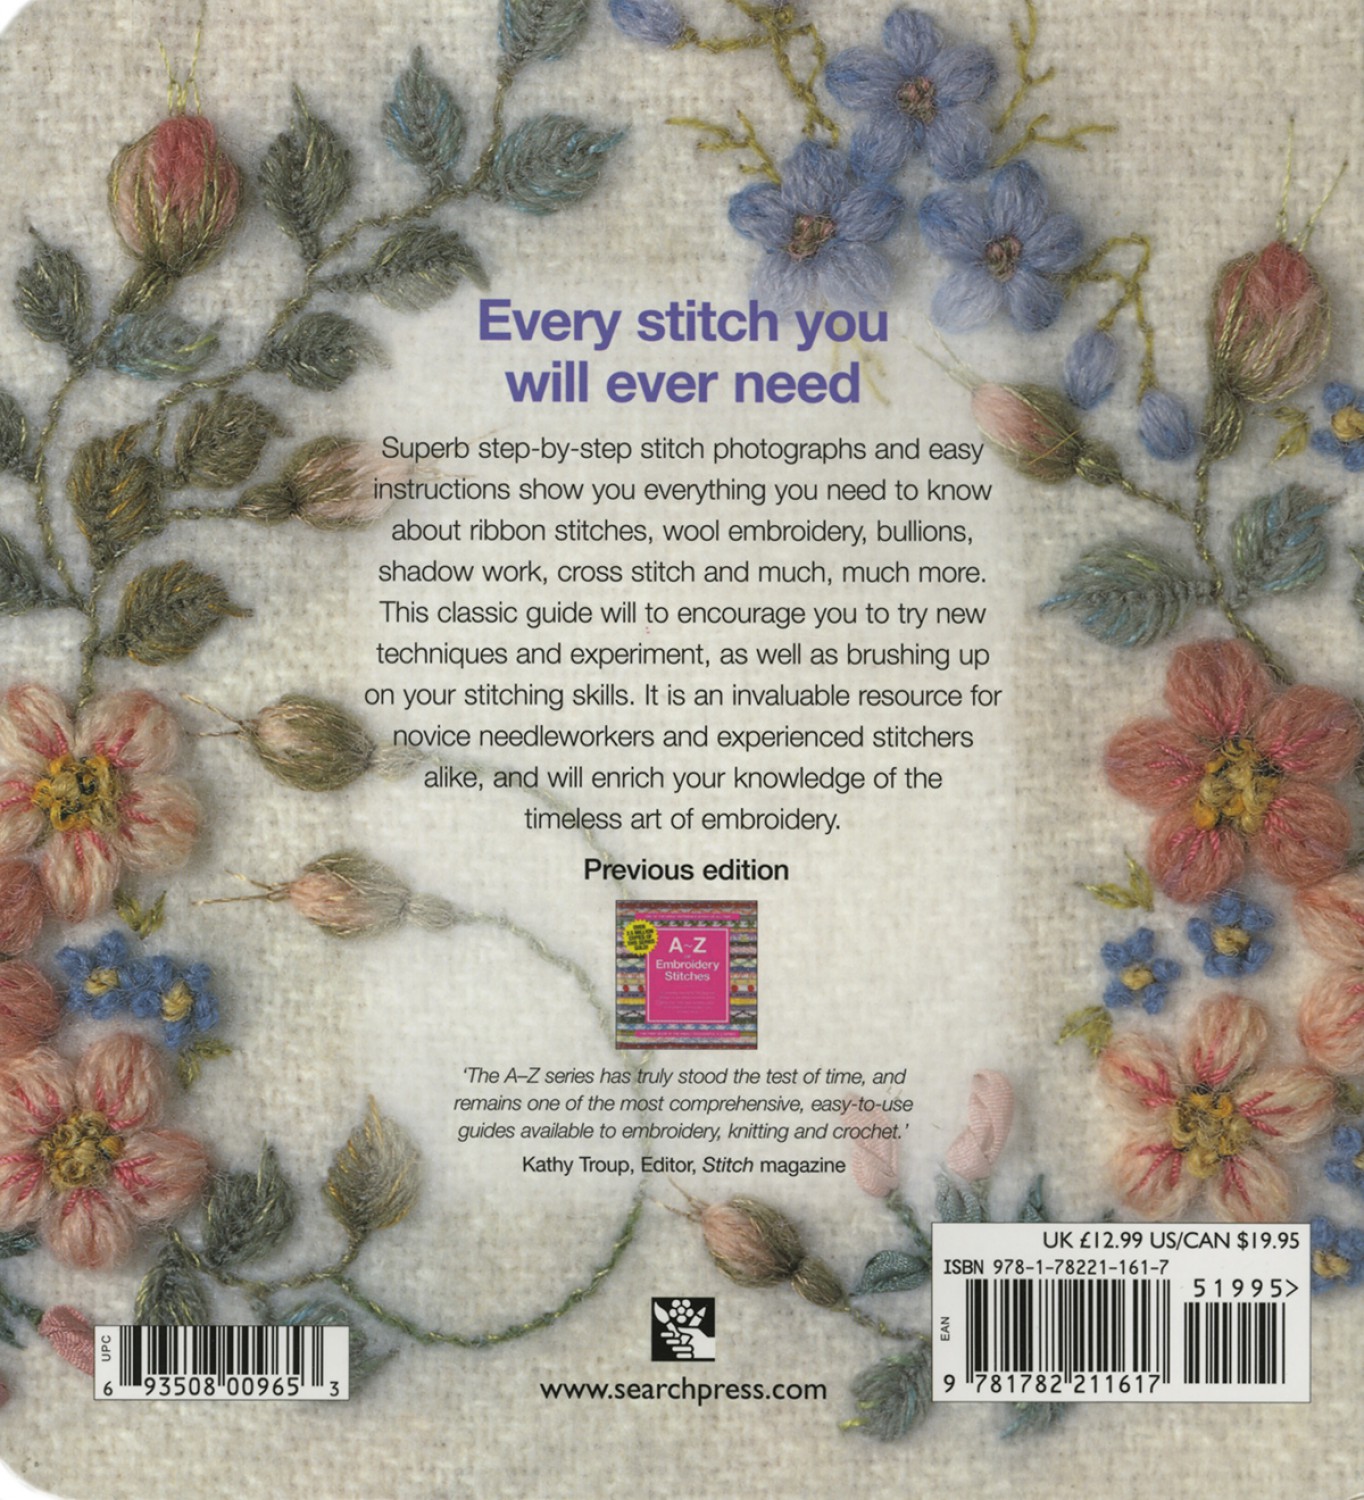 Book-A - Z of Embroidery Stitches